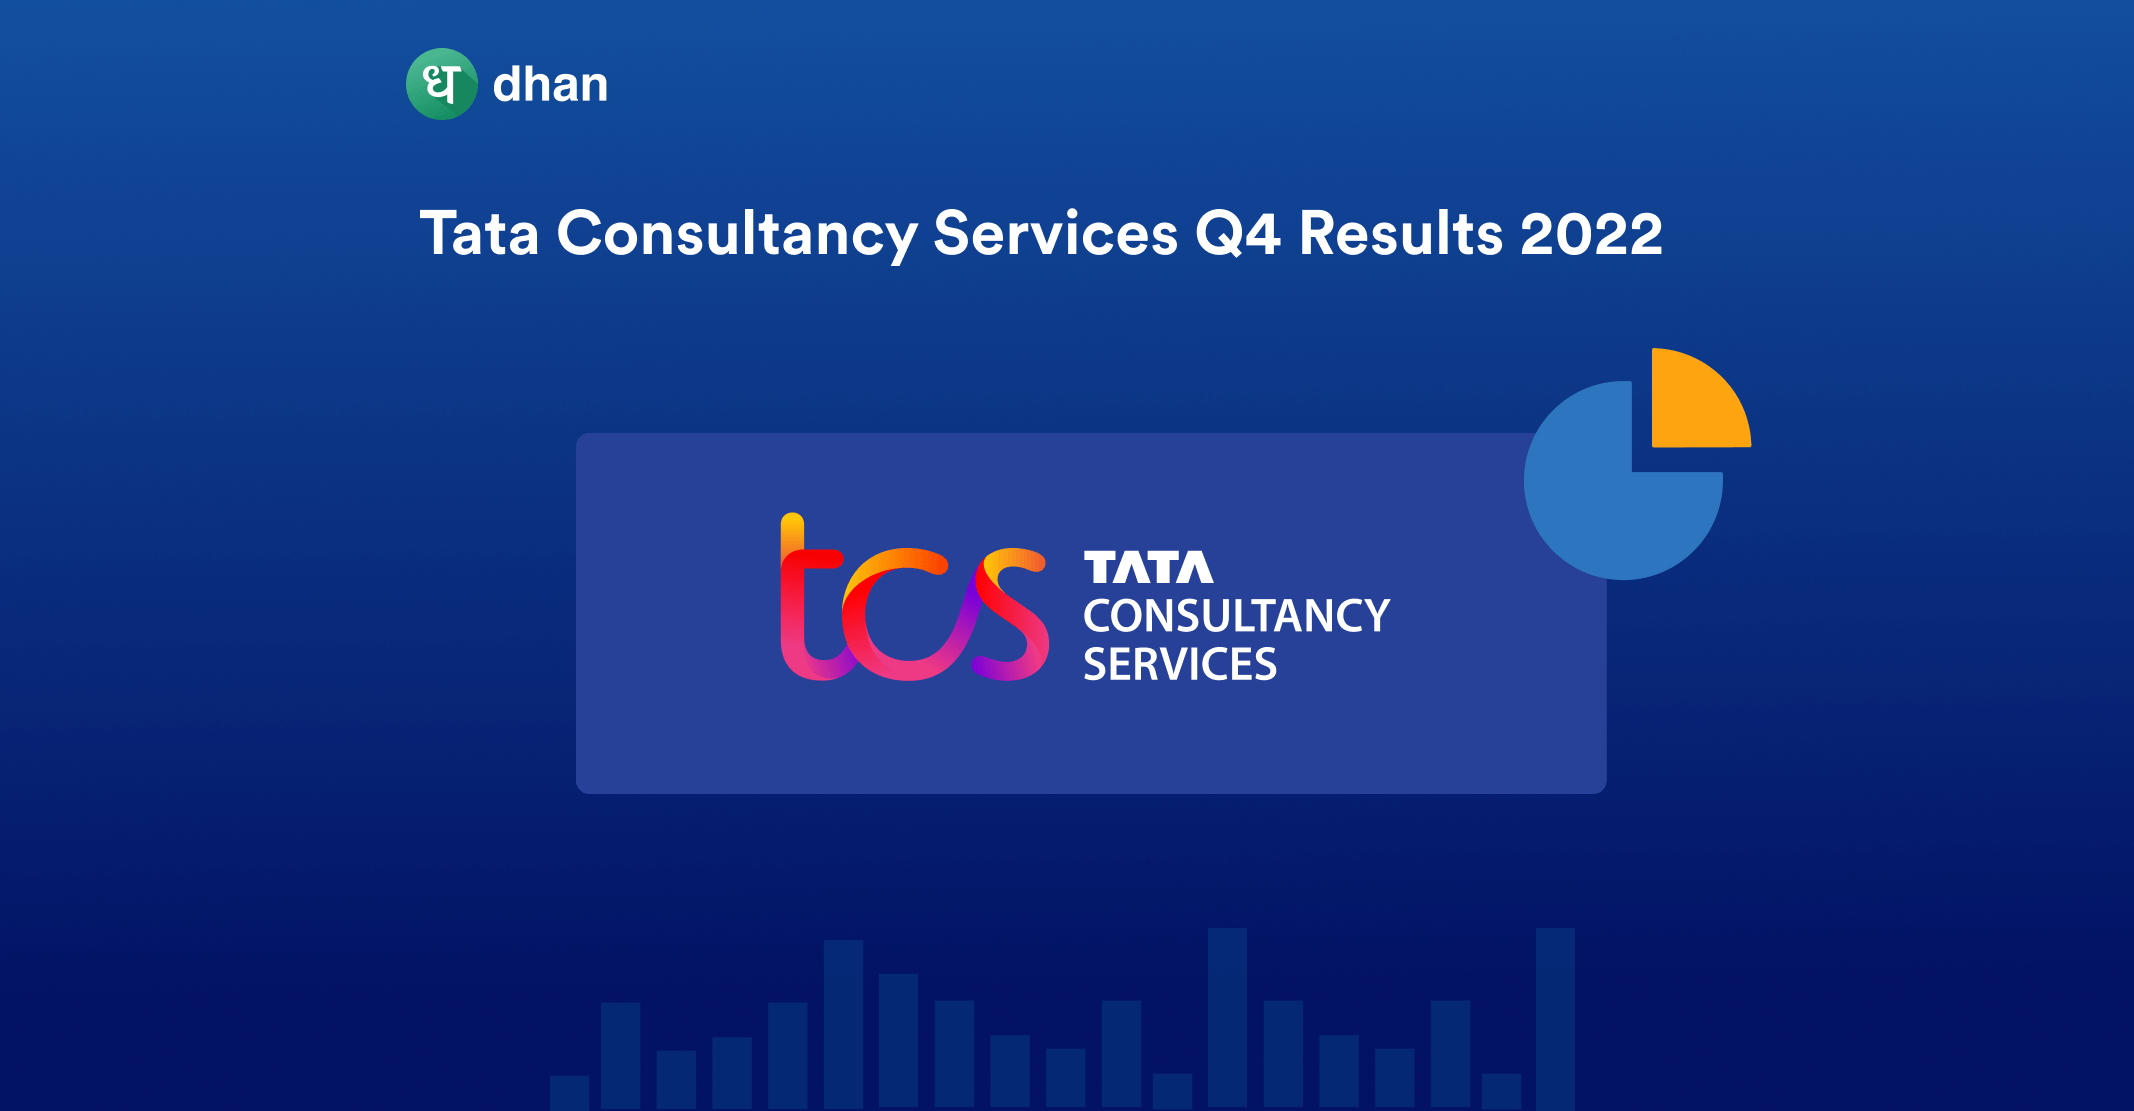 TCS Q4 Results 2022 - Revenue Up by 15.8% in Q4 YoY